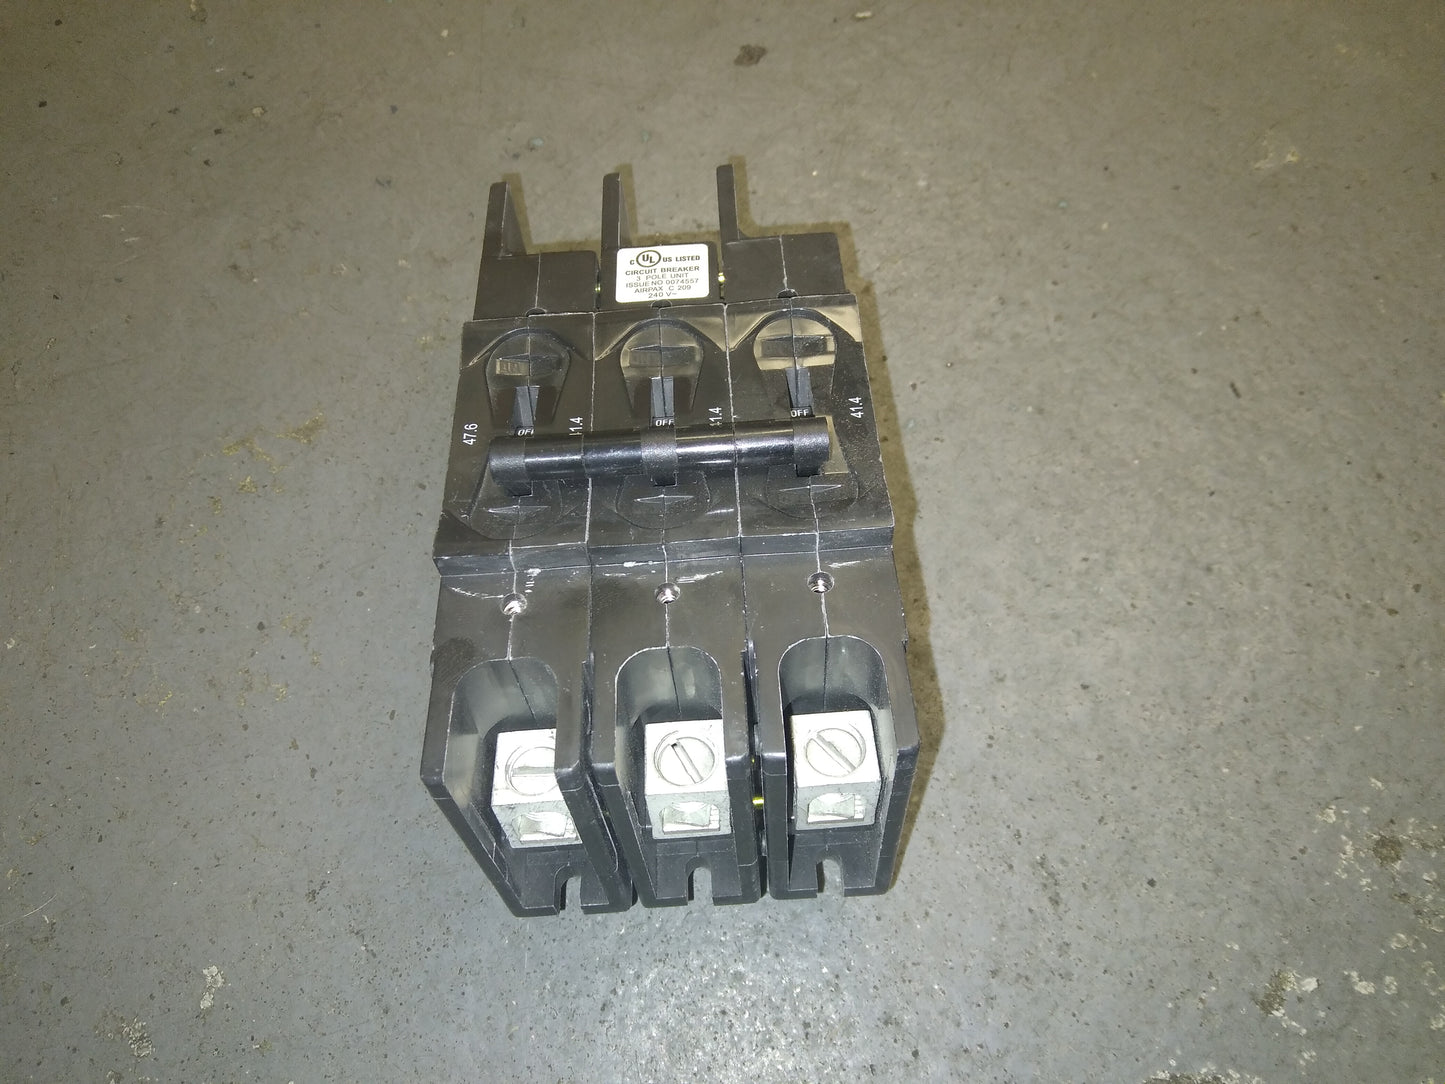 3 POLE 41.4 AMP "209 MULTI-POLE" SERIES HYDRAULIC MAGNETIC CIRCUIT BREAKER PROTECTOR/FOR MANUAL CONTROLLER APPLICATIONS, 240/60-50/1 OR 3